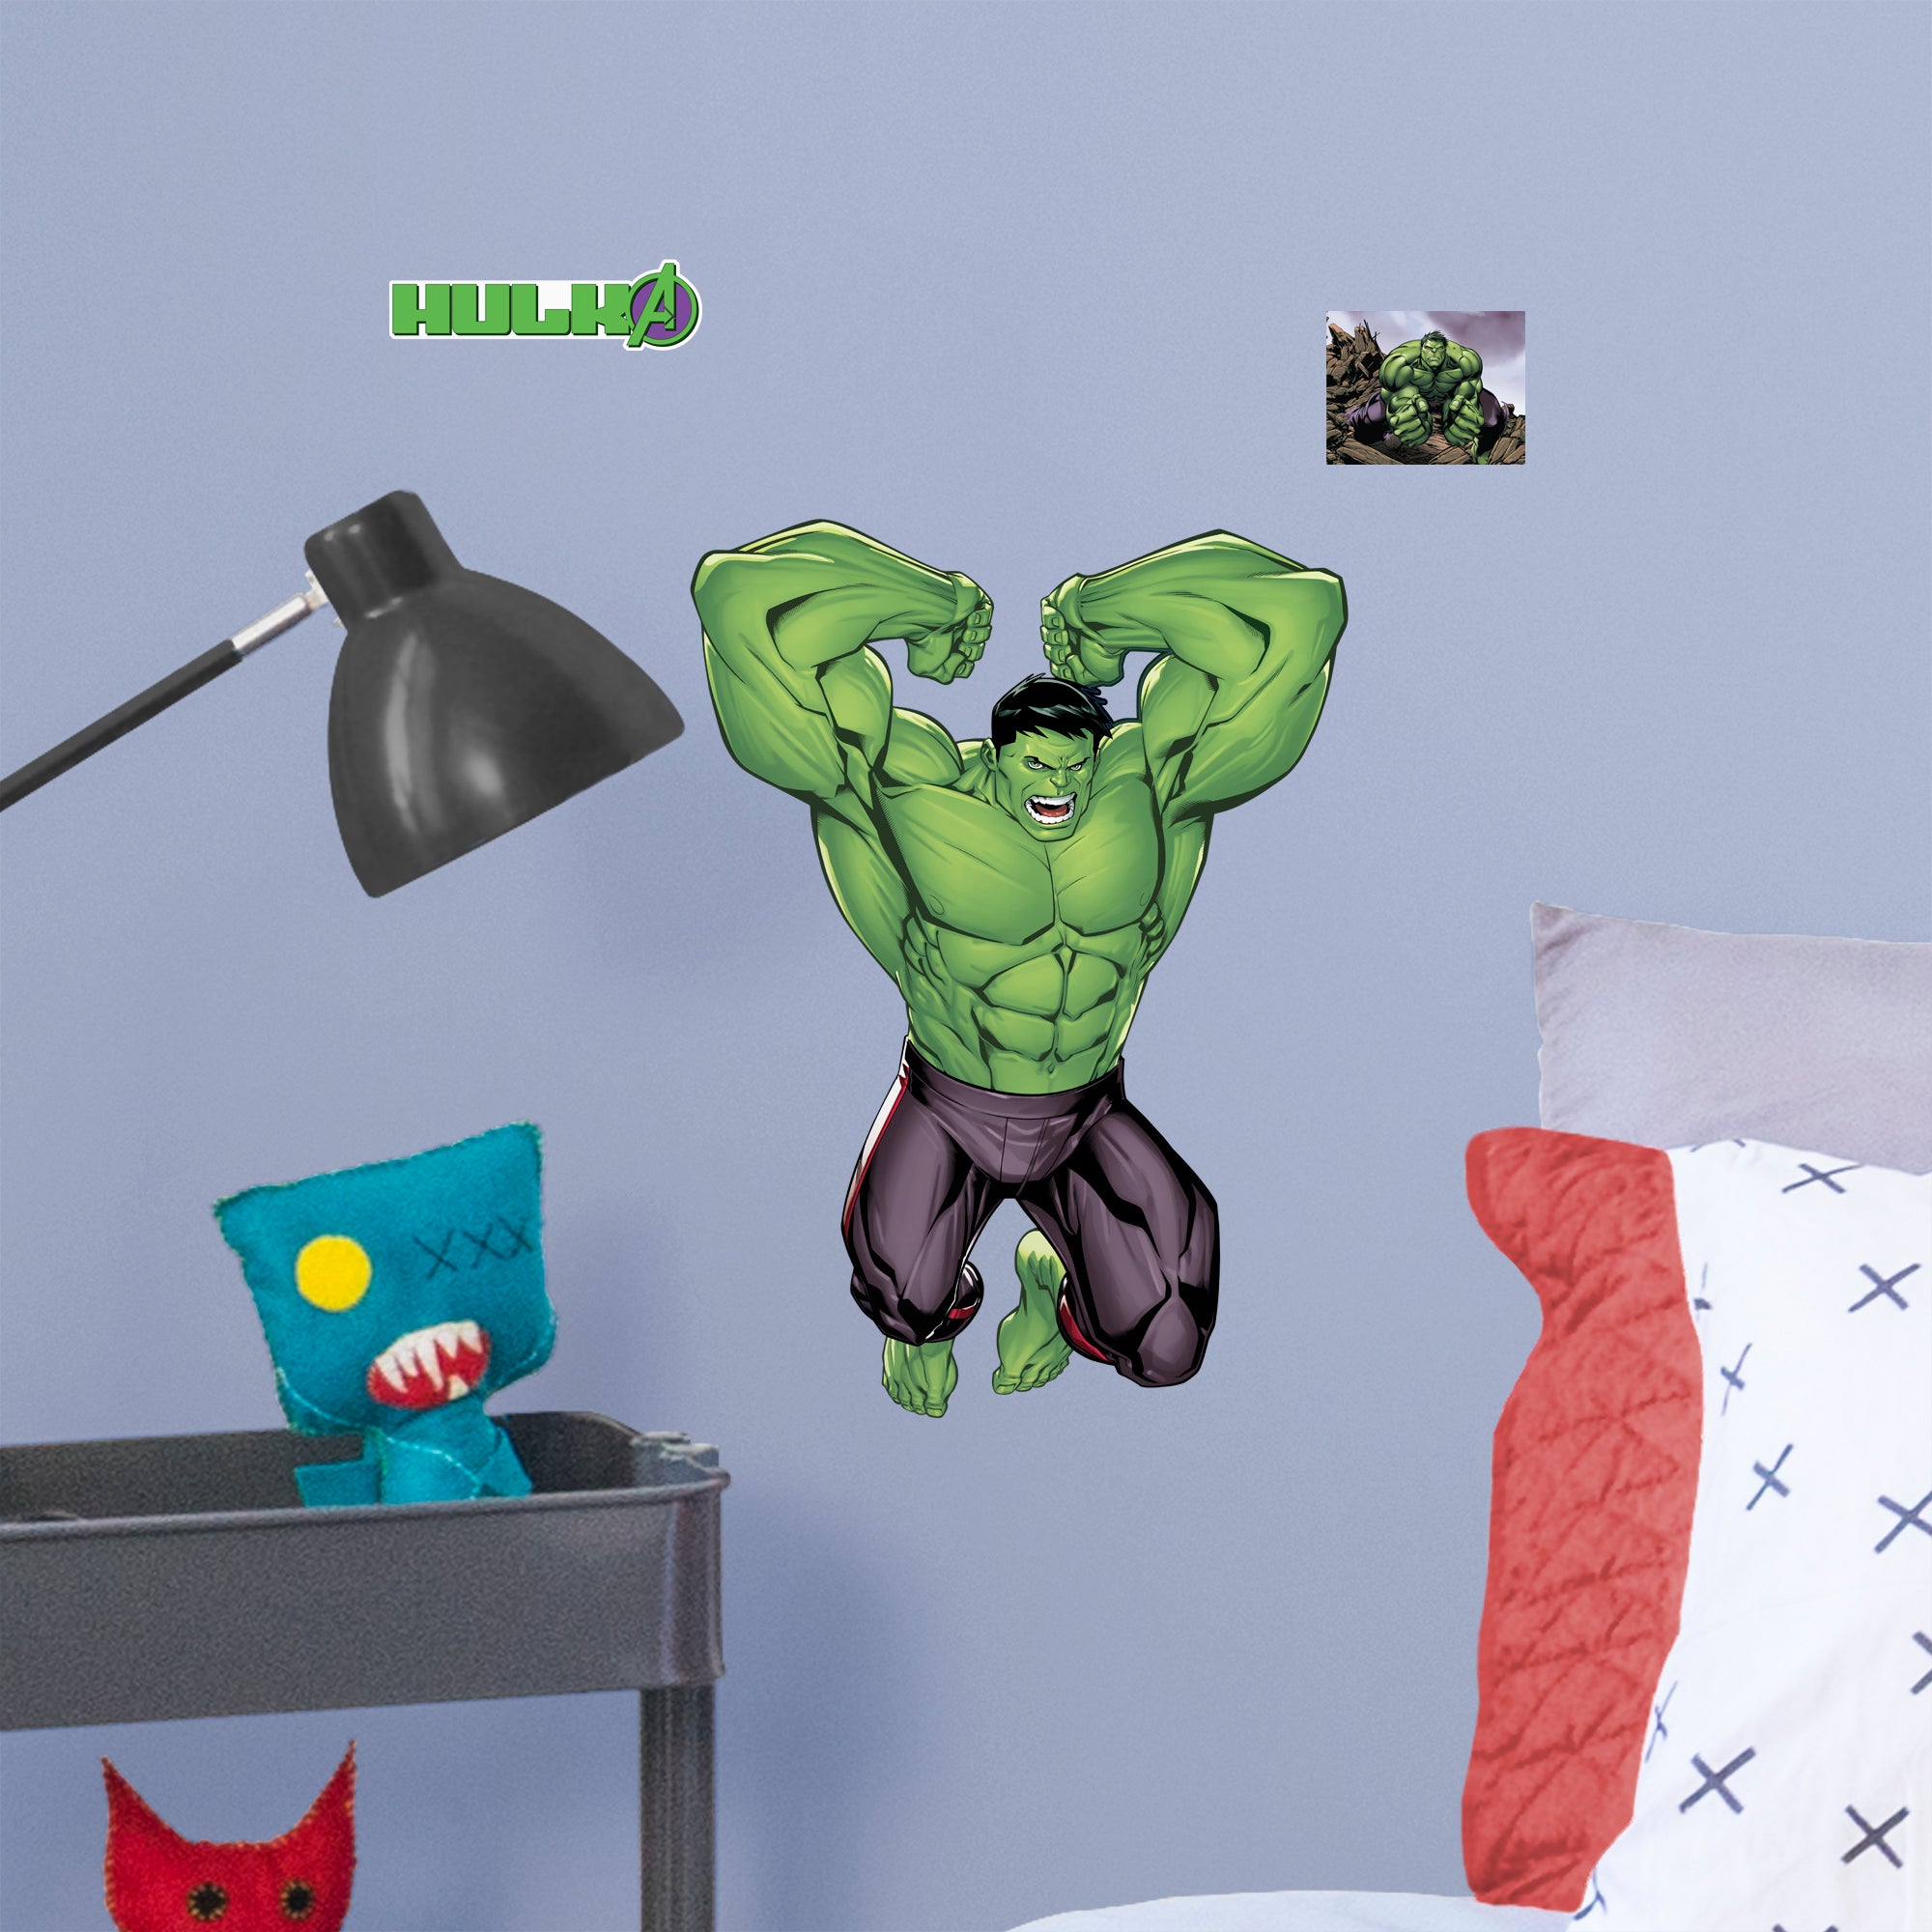 Hulk: Avengers Core - Officially Licensed Removable Wall Decal Large by Fathead | Vinyl